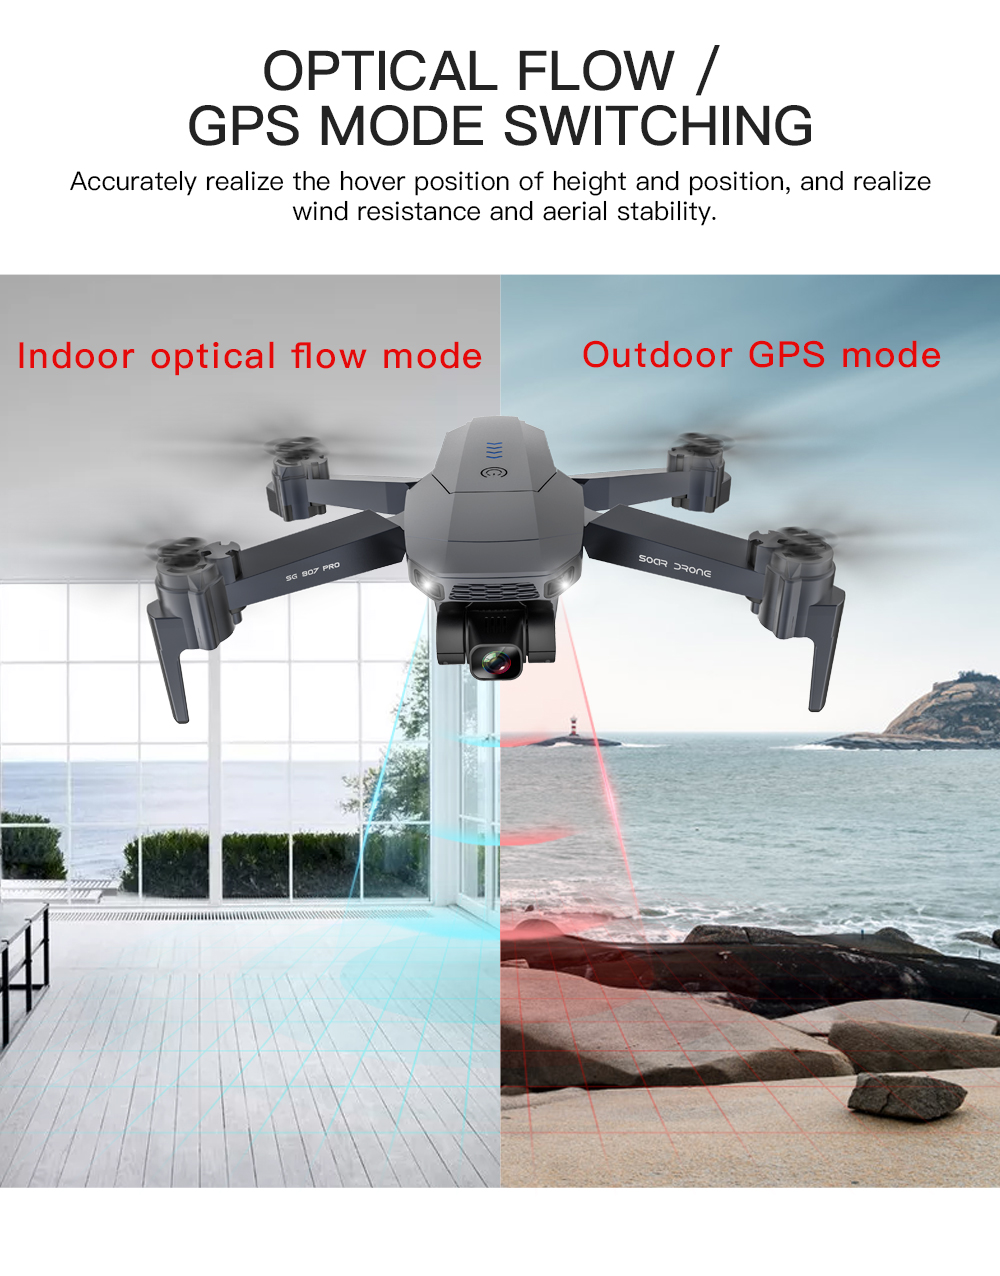 ZLL SG907 Pro 5G WIFI FPV GPS With 4K HD Dual Camera Two-axis Gimbal Optical Flow Positioning Foldable RC Drone Quadcopter RTF 100